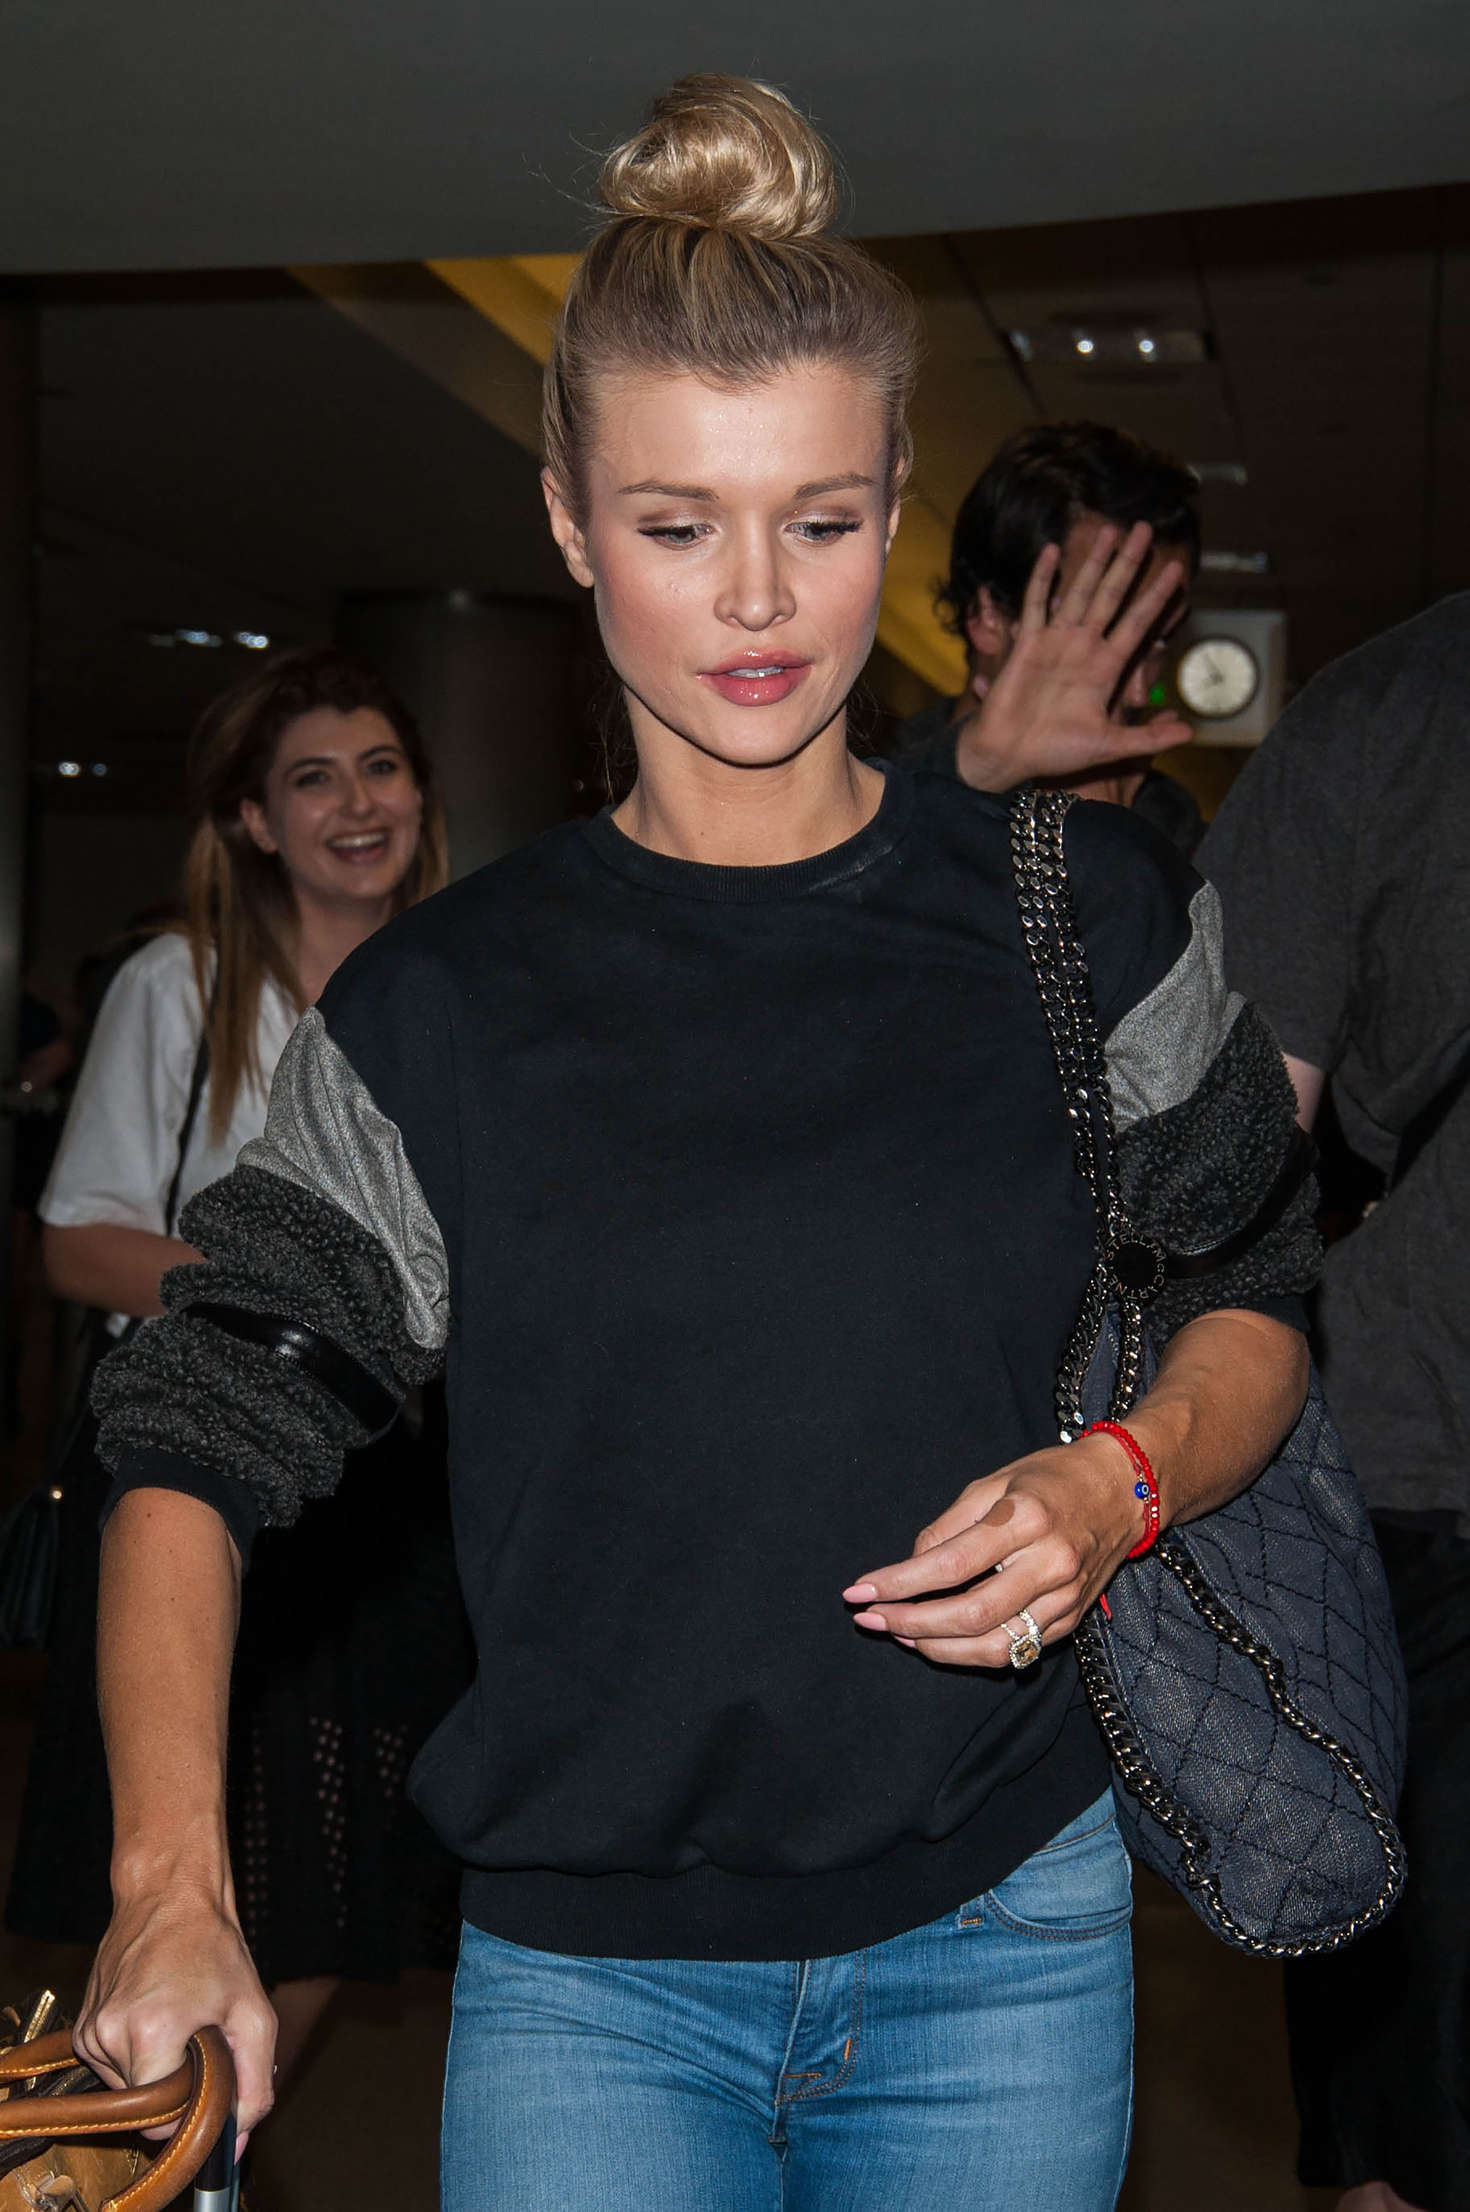 Joanna Krupa in Jedans at LAX Airport in Los Angeles